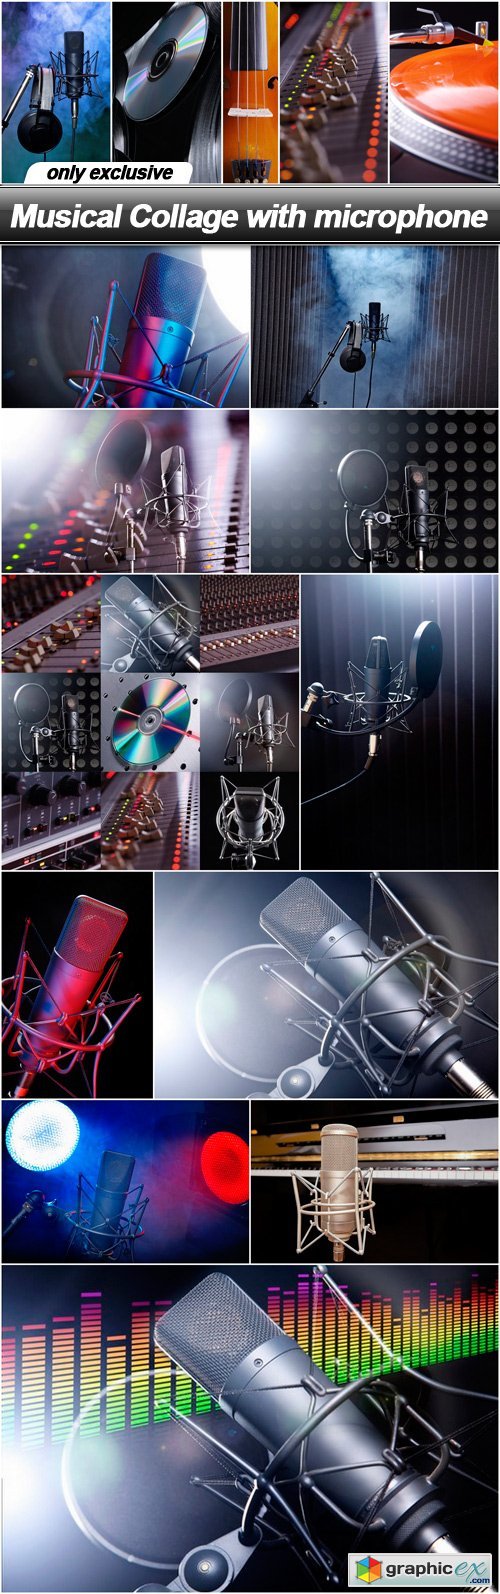 Musical Collage with microphone - 12 UHQ JPEG